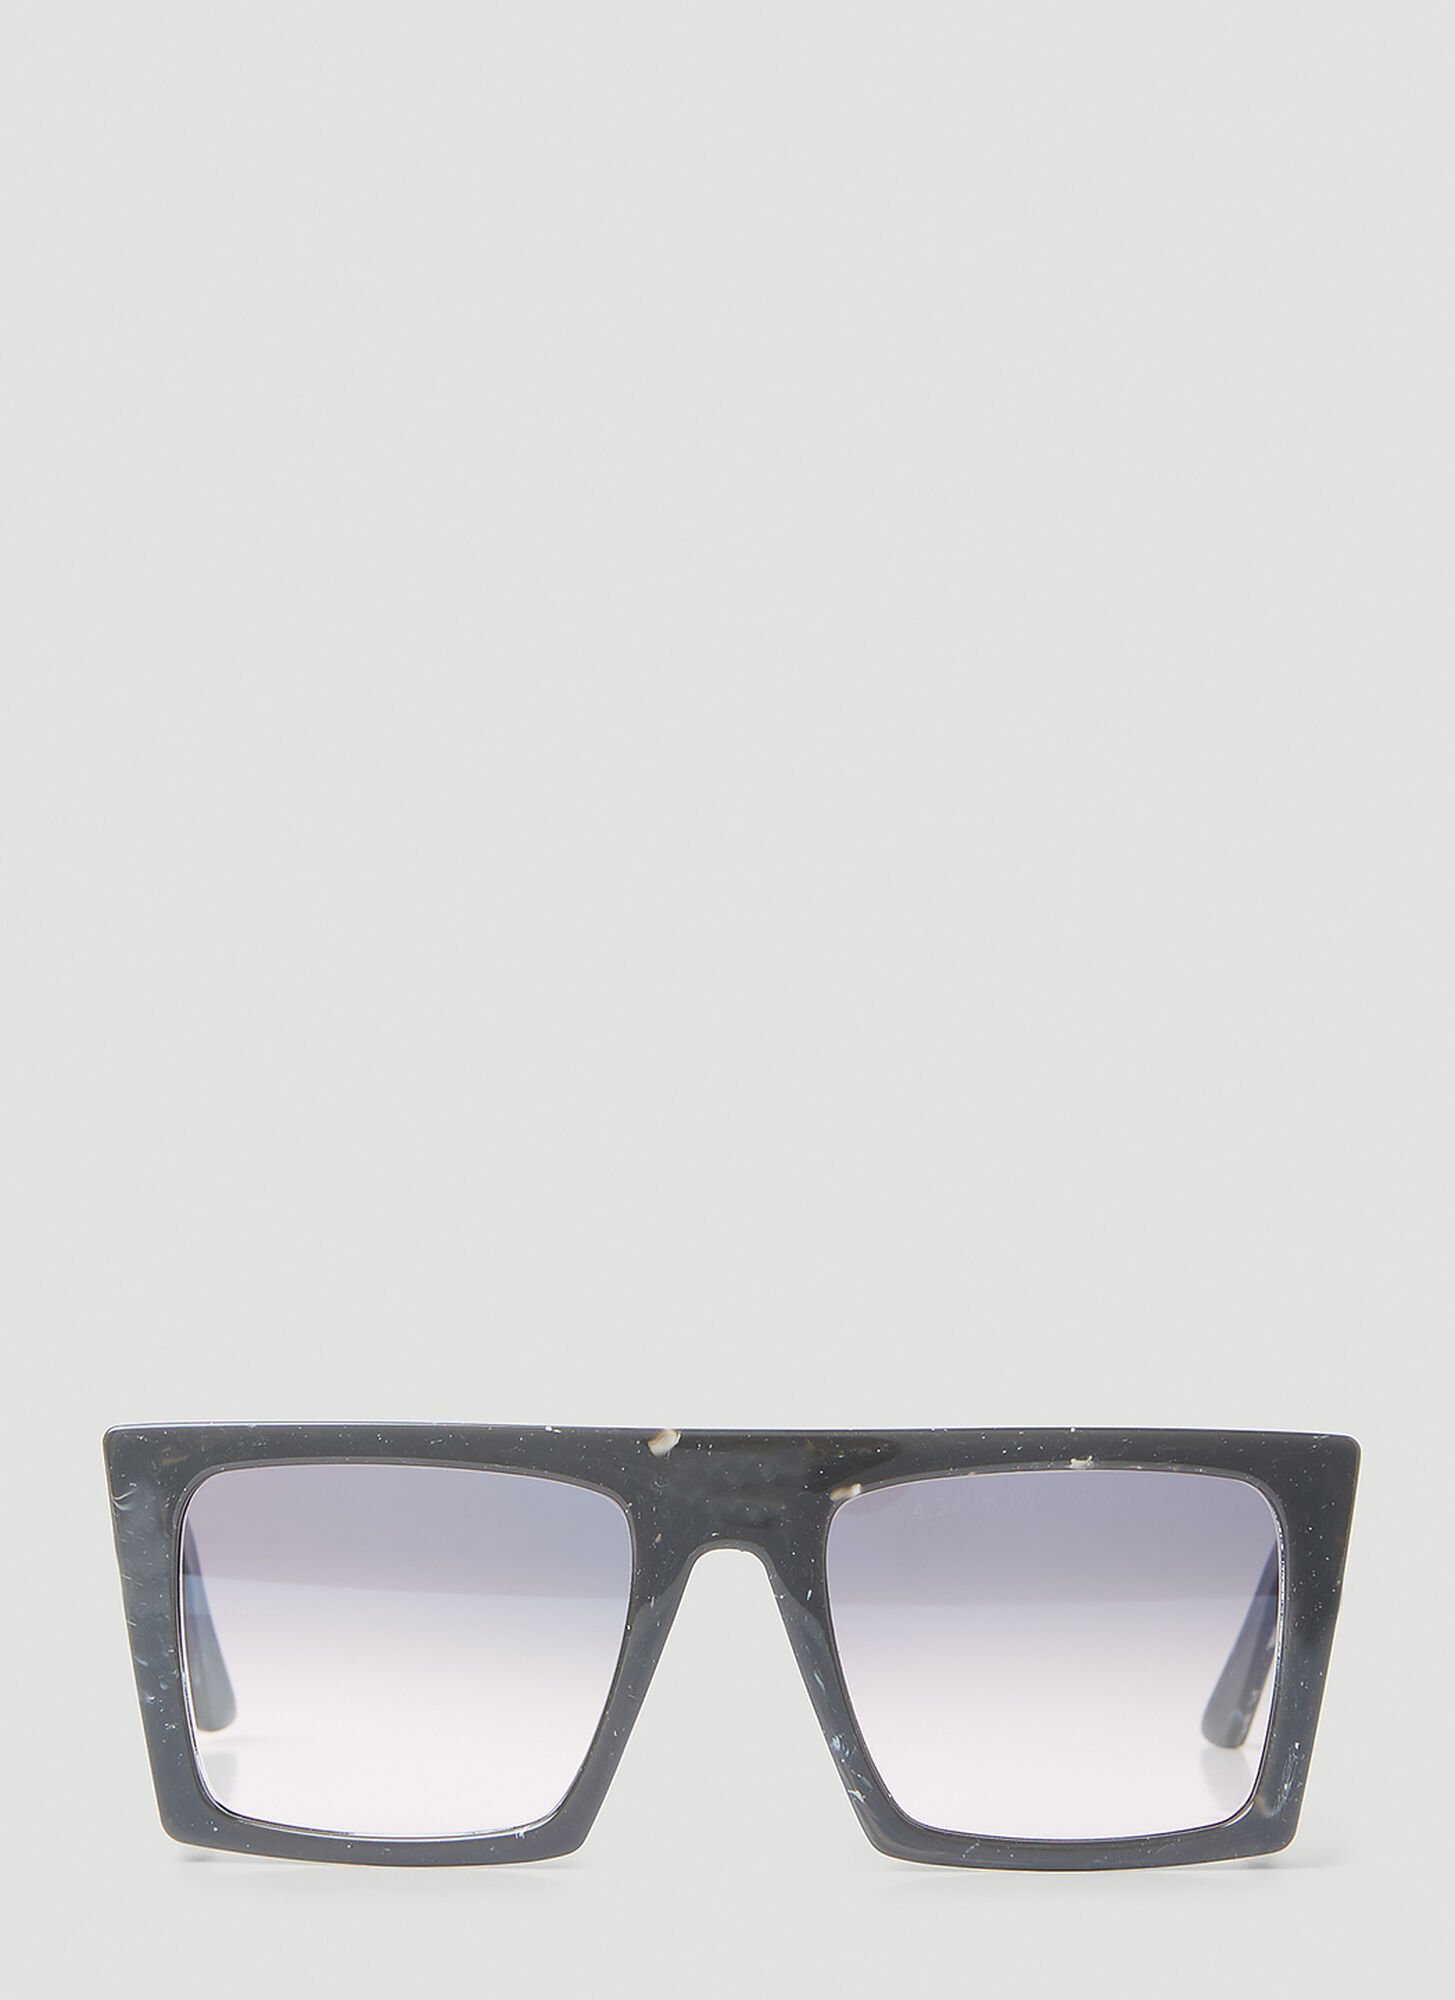 Clean Waves Type 3 Tall Marbled Sunglasses Unisex Grey